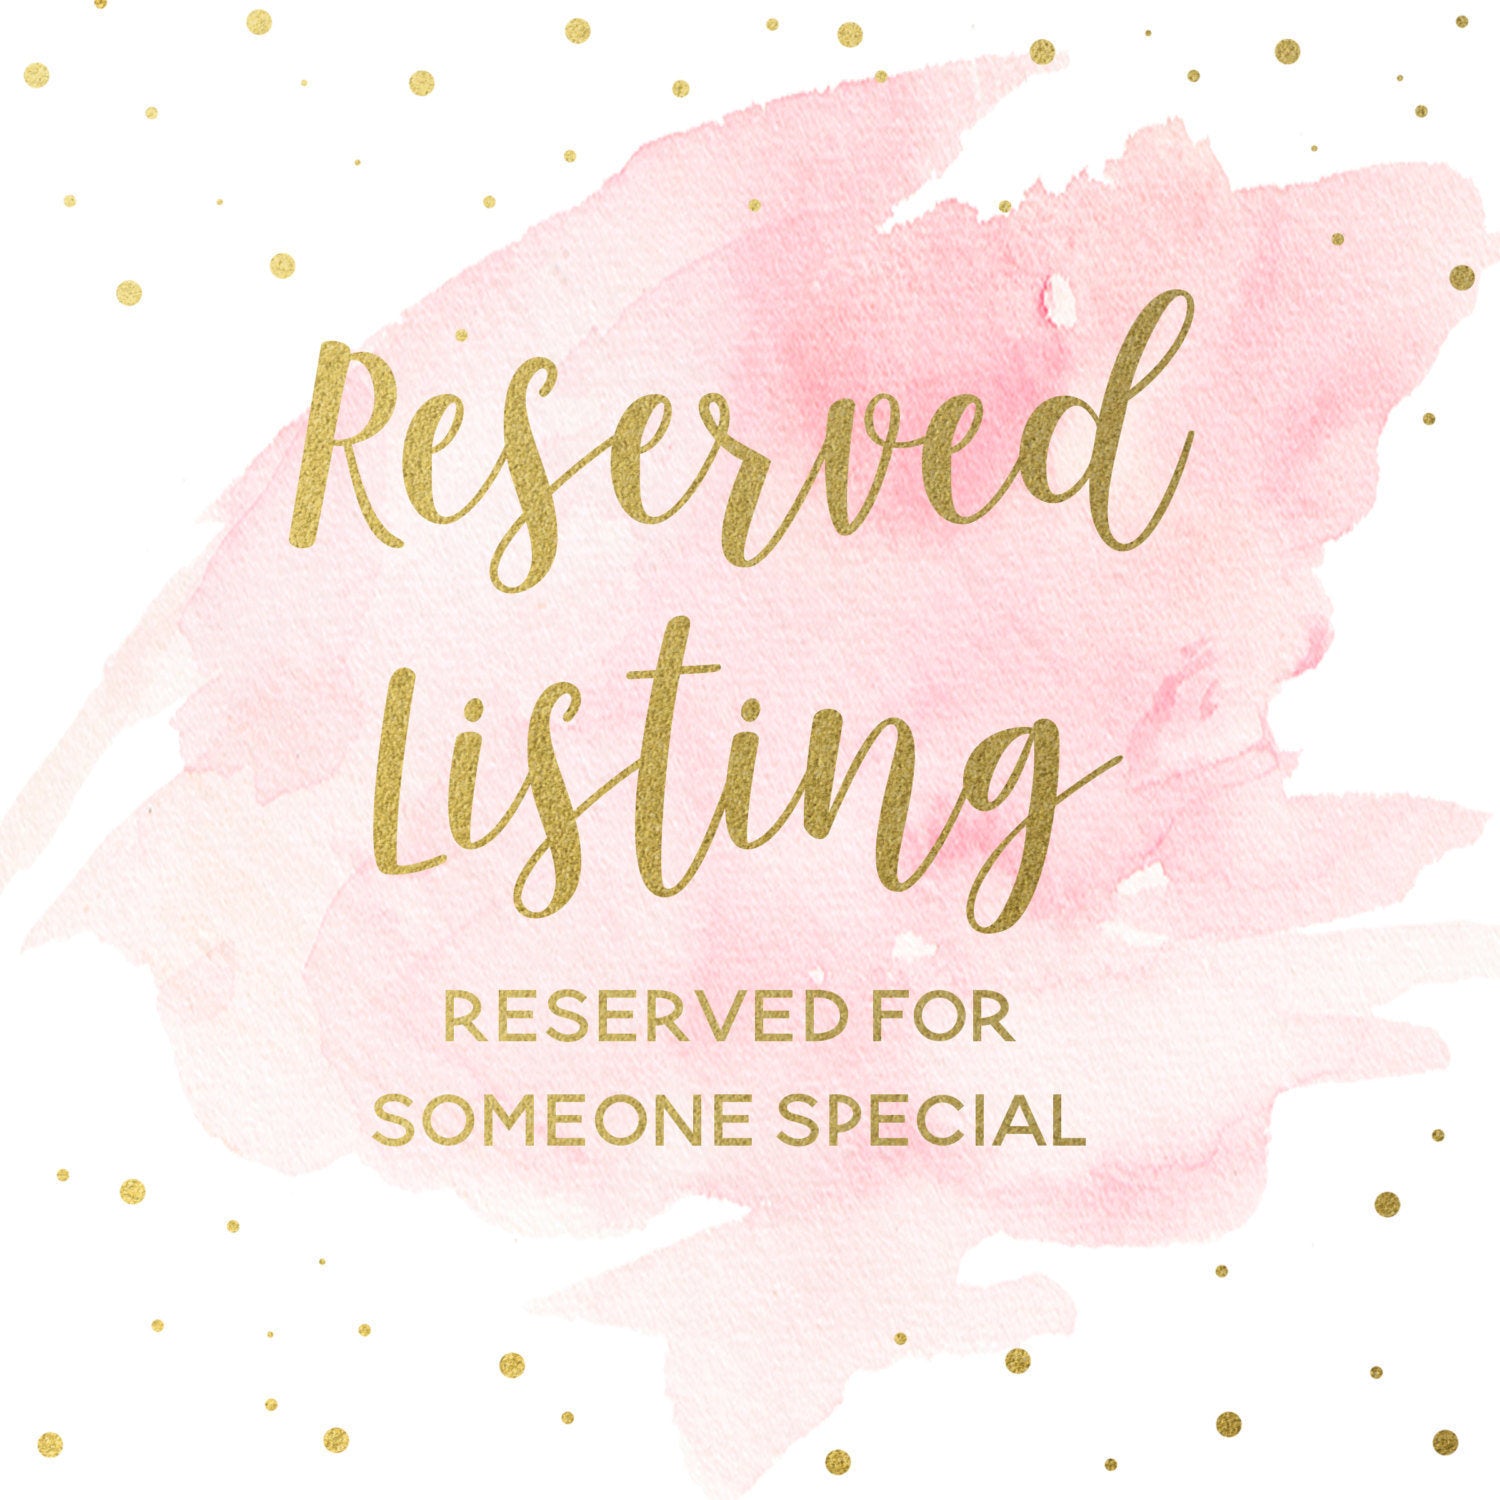 Reserved Listing - Dylan